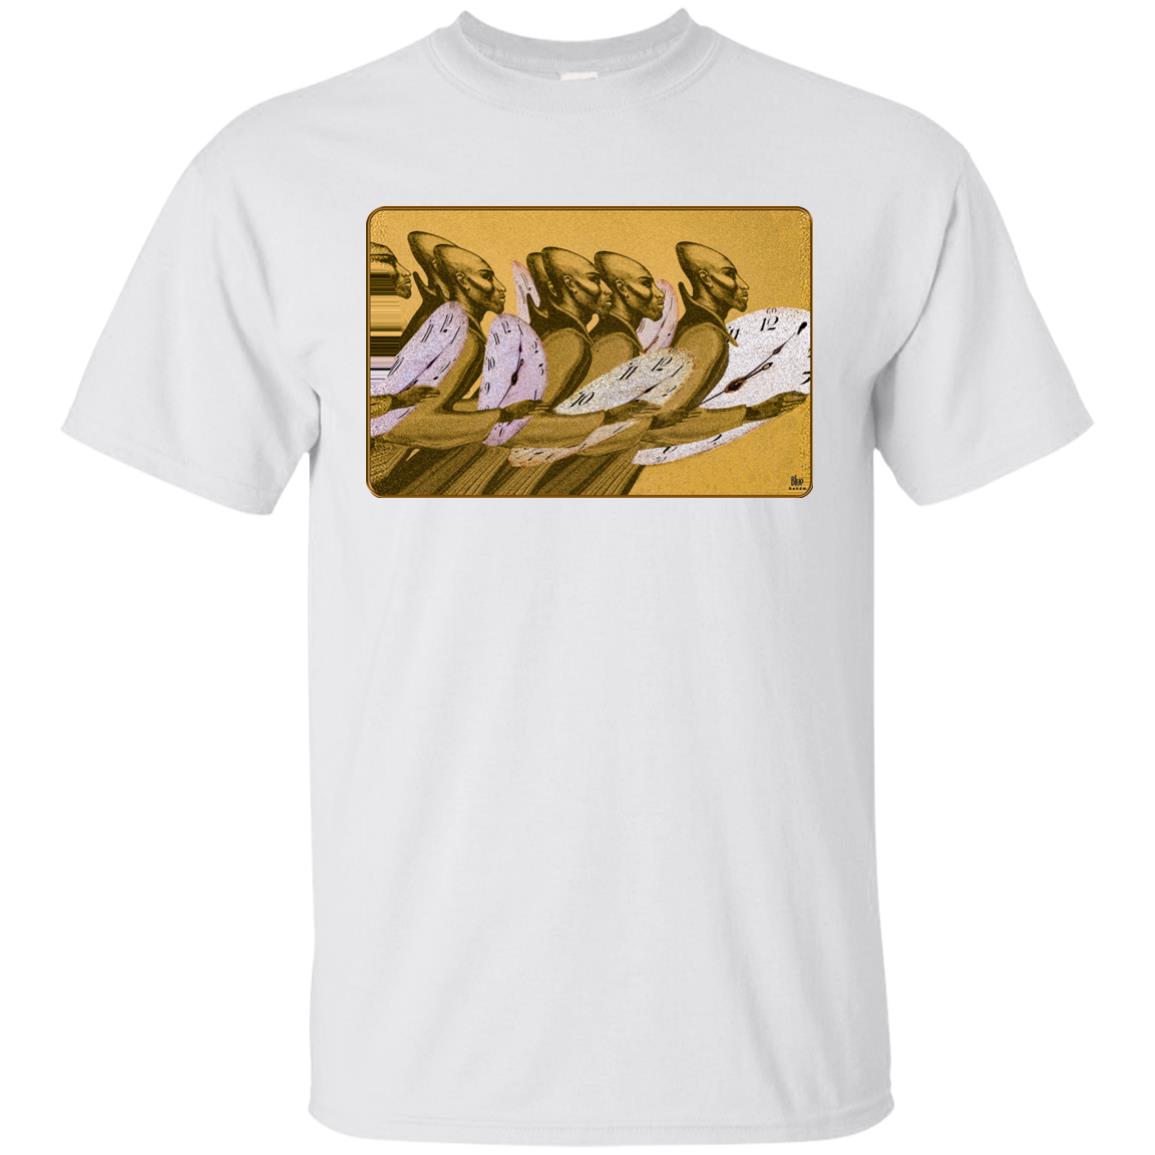 Time Marching On - Gold - Men's Classic Fit T-Shirt